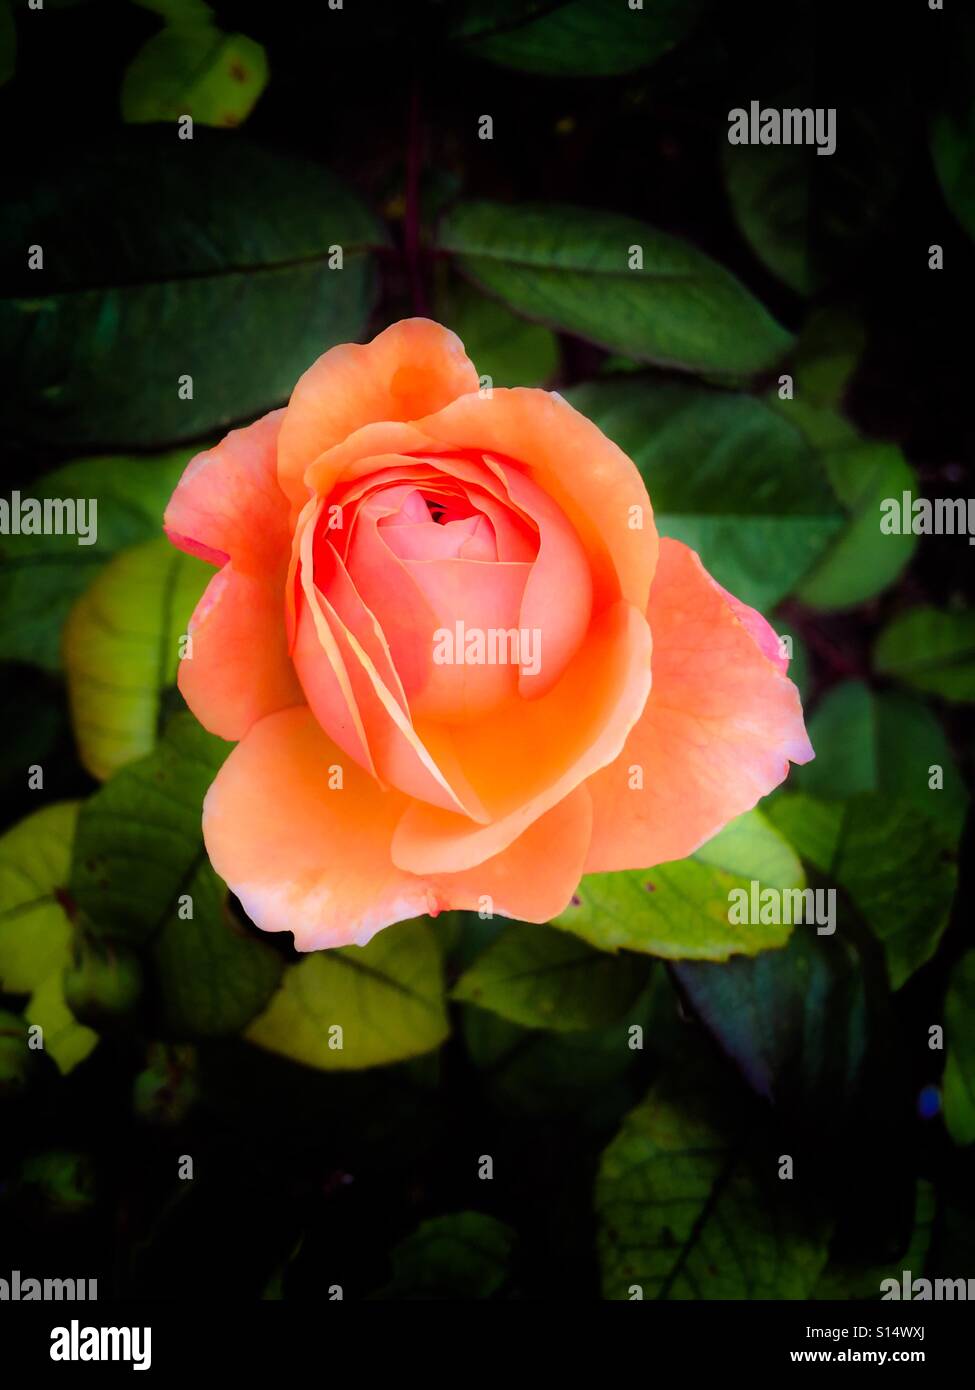 A single apricot coloured rose surrounded by leaves Stock Photo